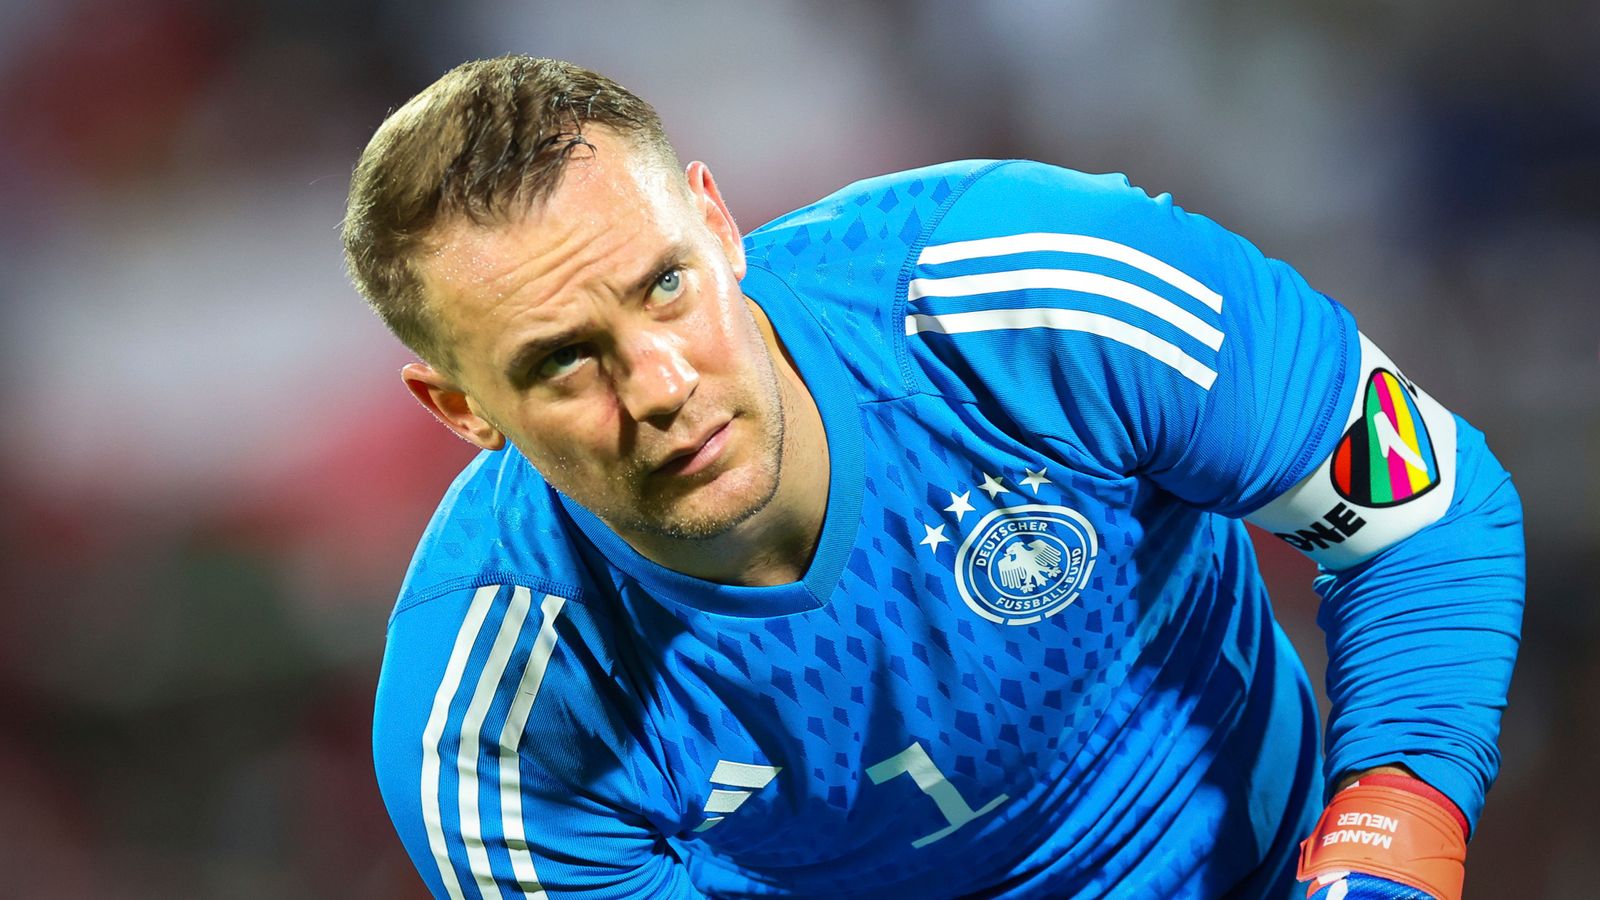 Manuel Neuer wears the One Love armband during a Germany match